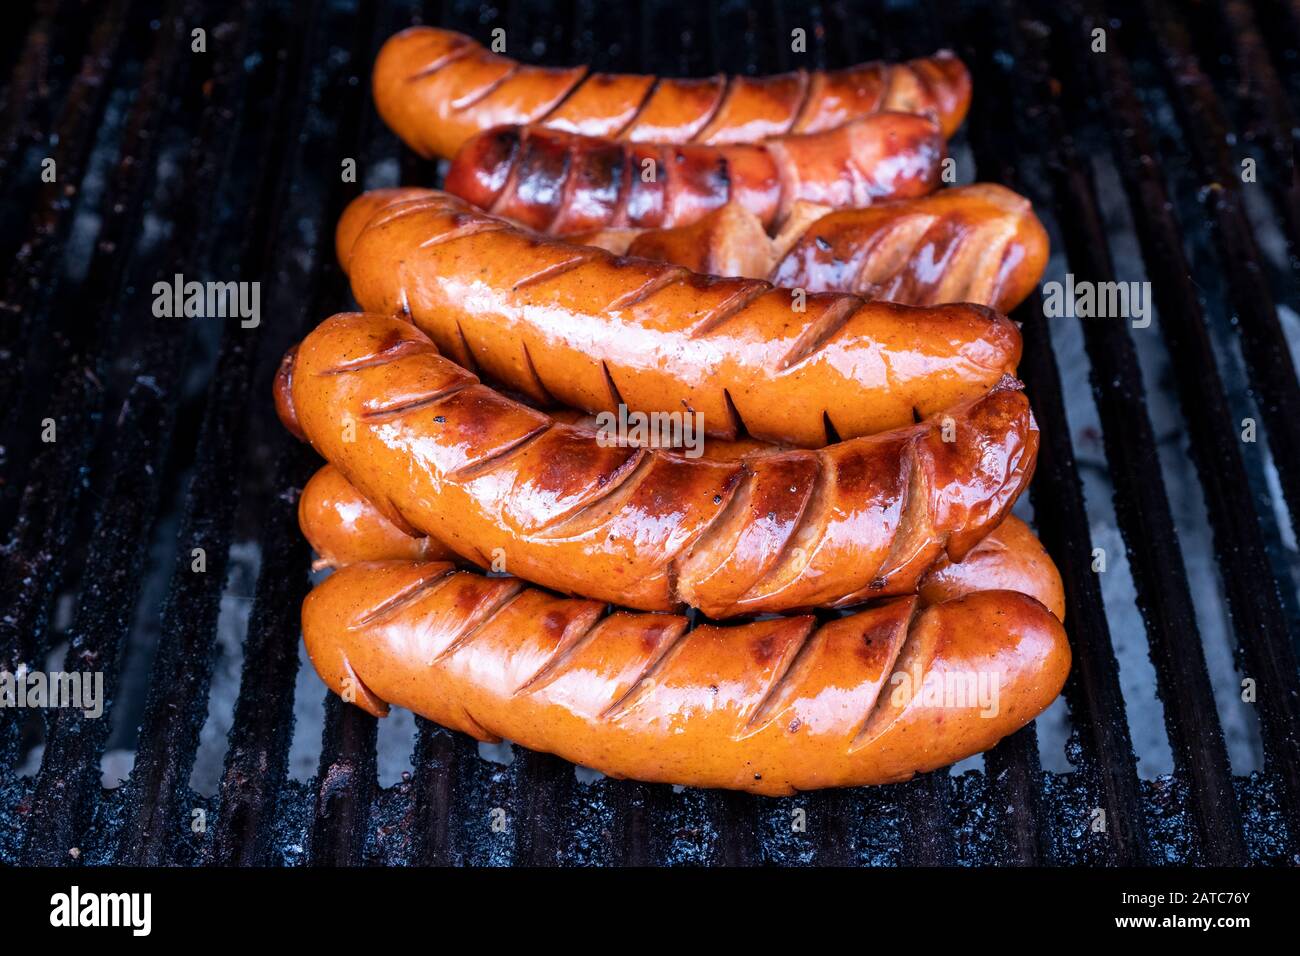 Juicy sausages grilled on the bbq Stock Photo